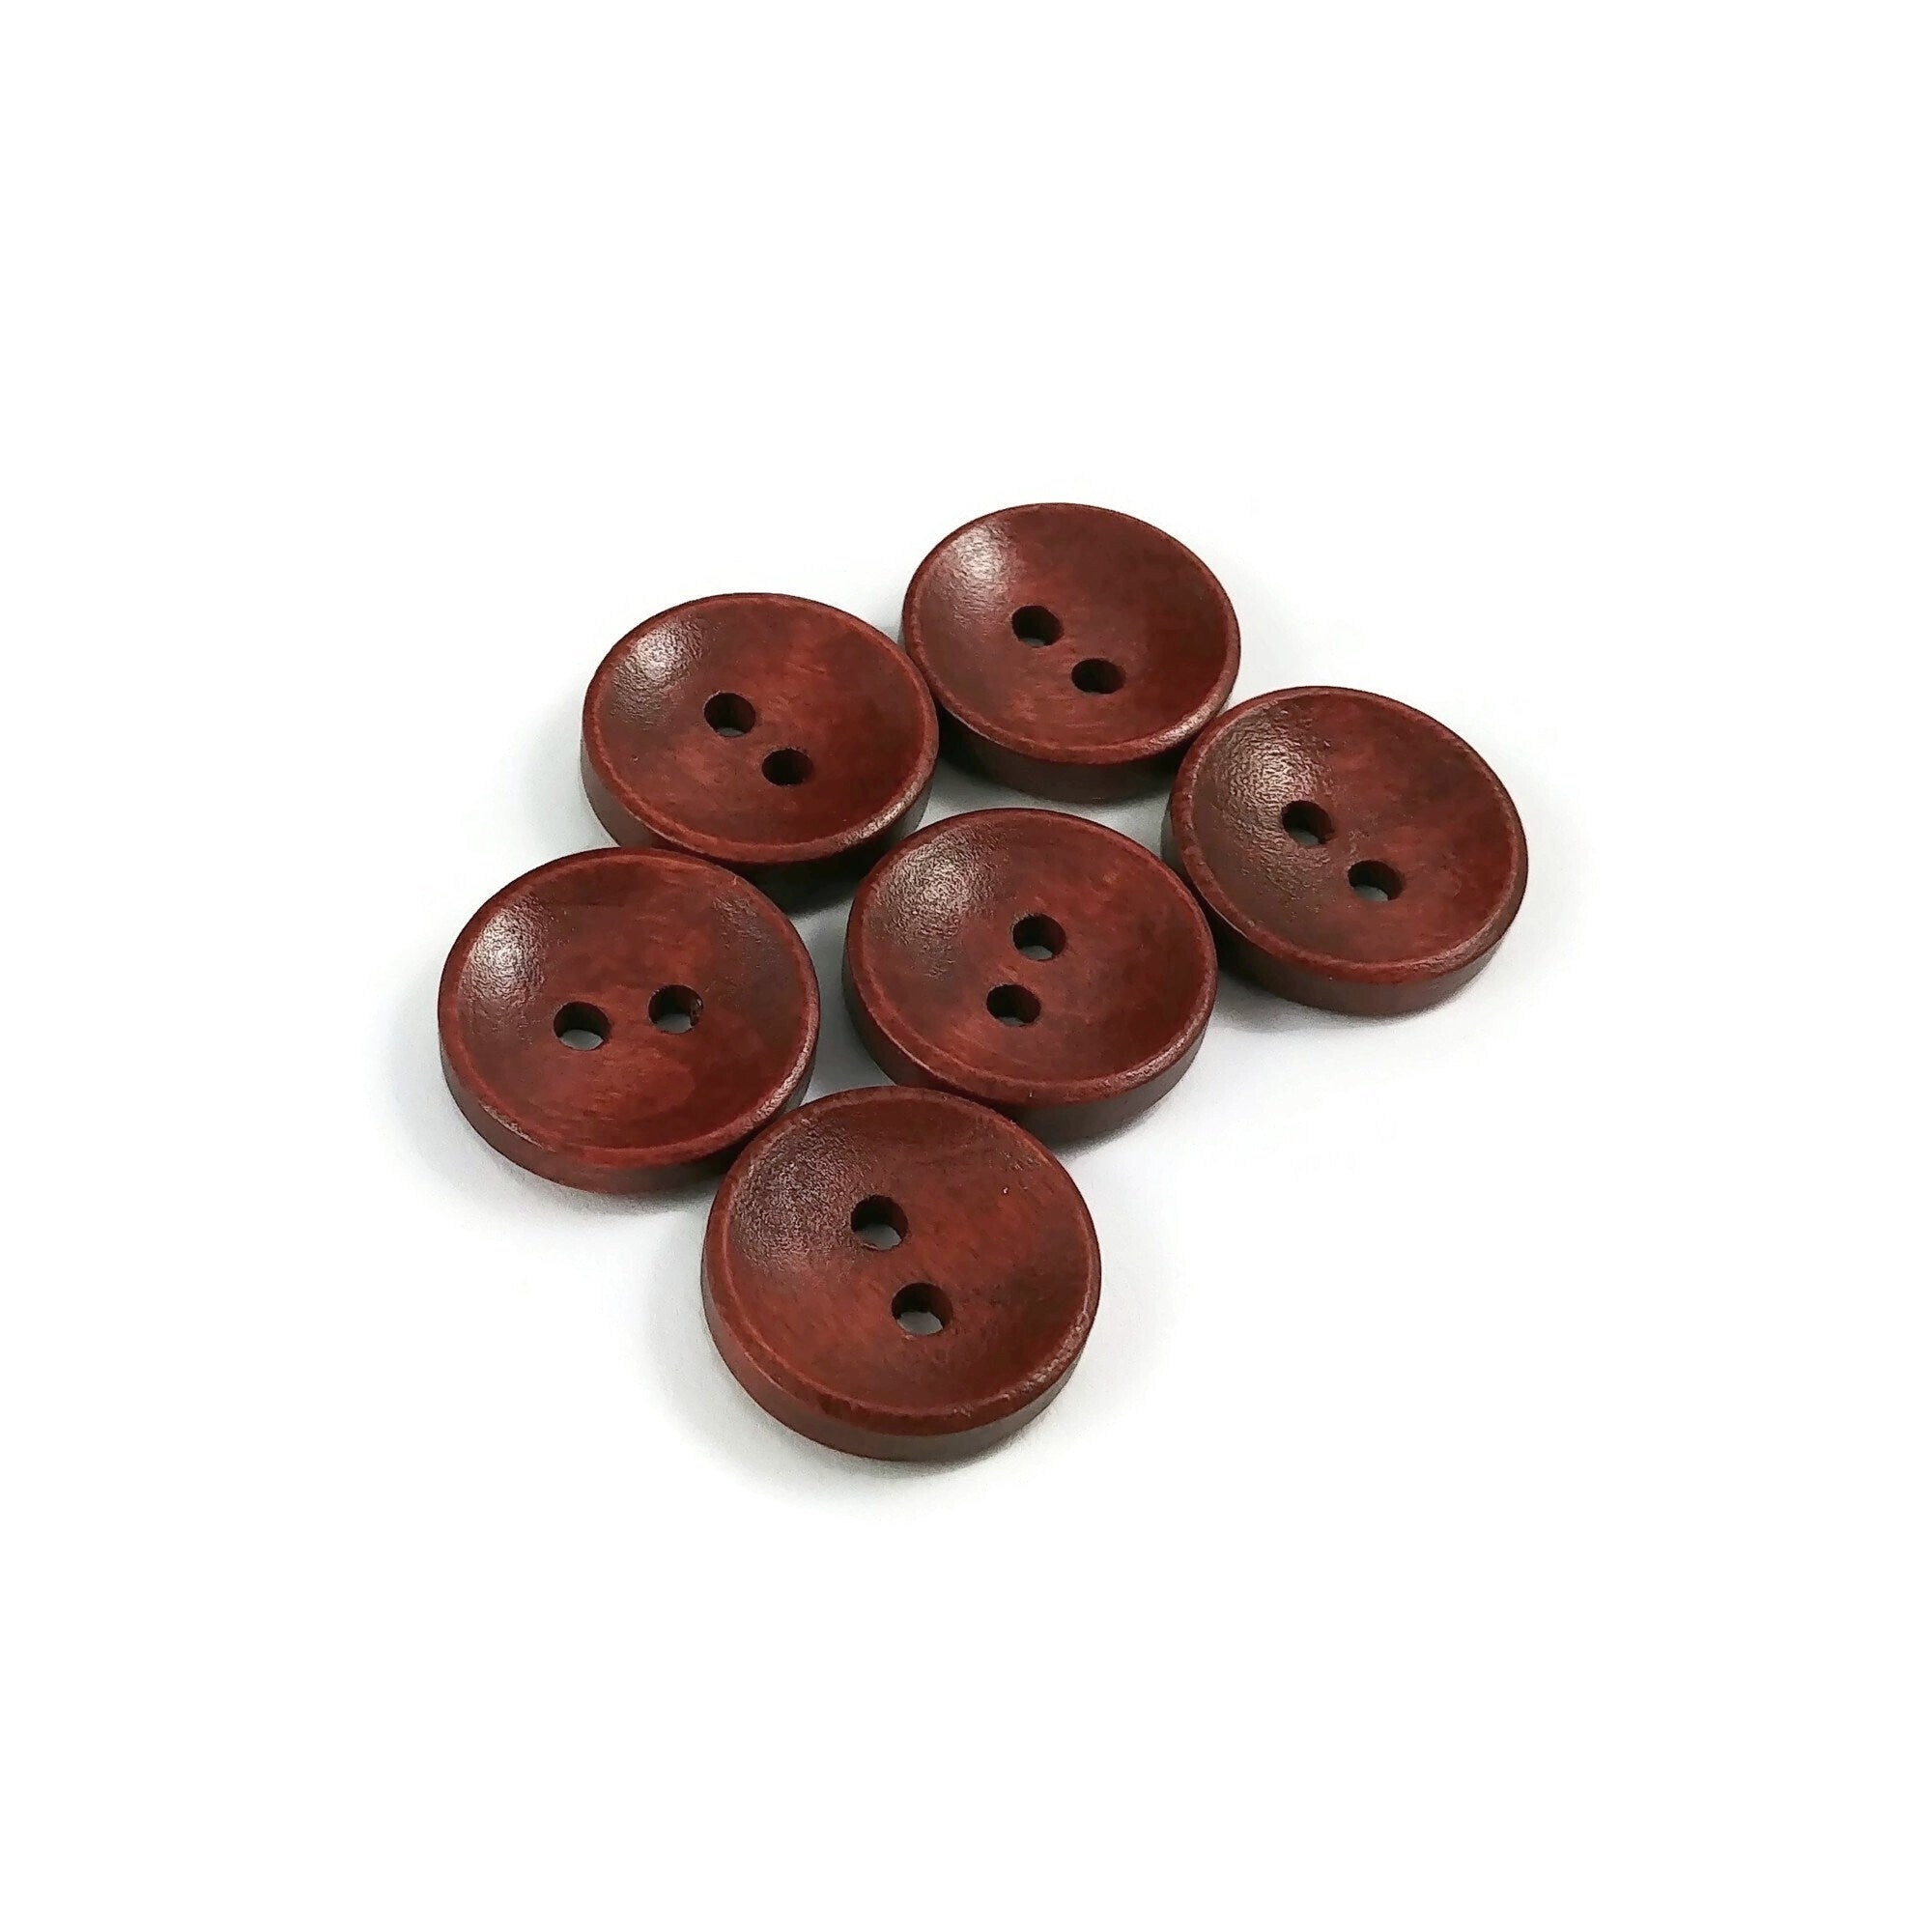 15mm bright coloured wooden buttons, pack of 10